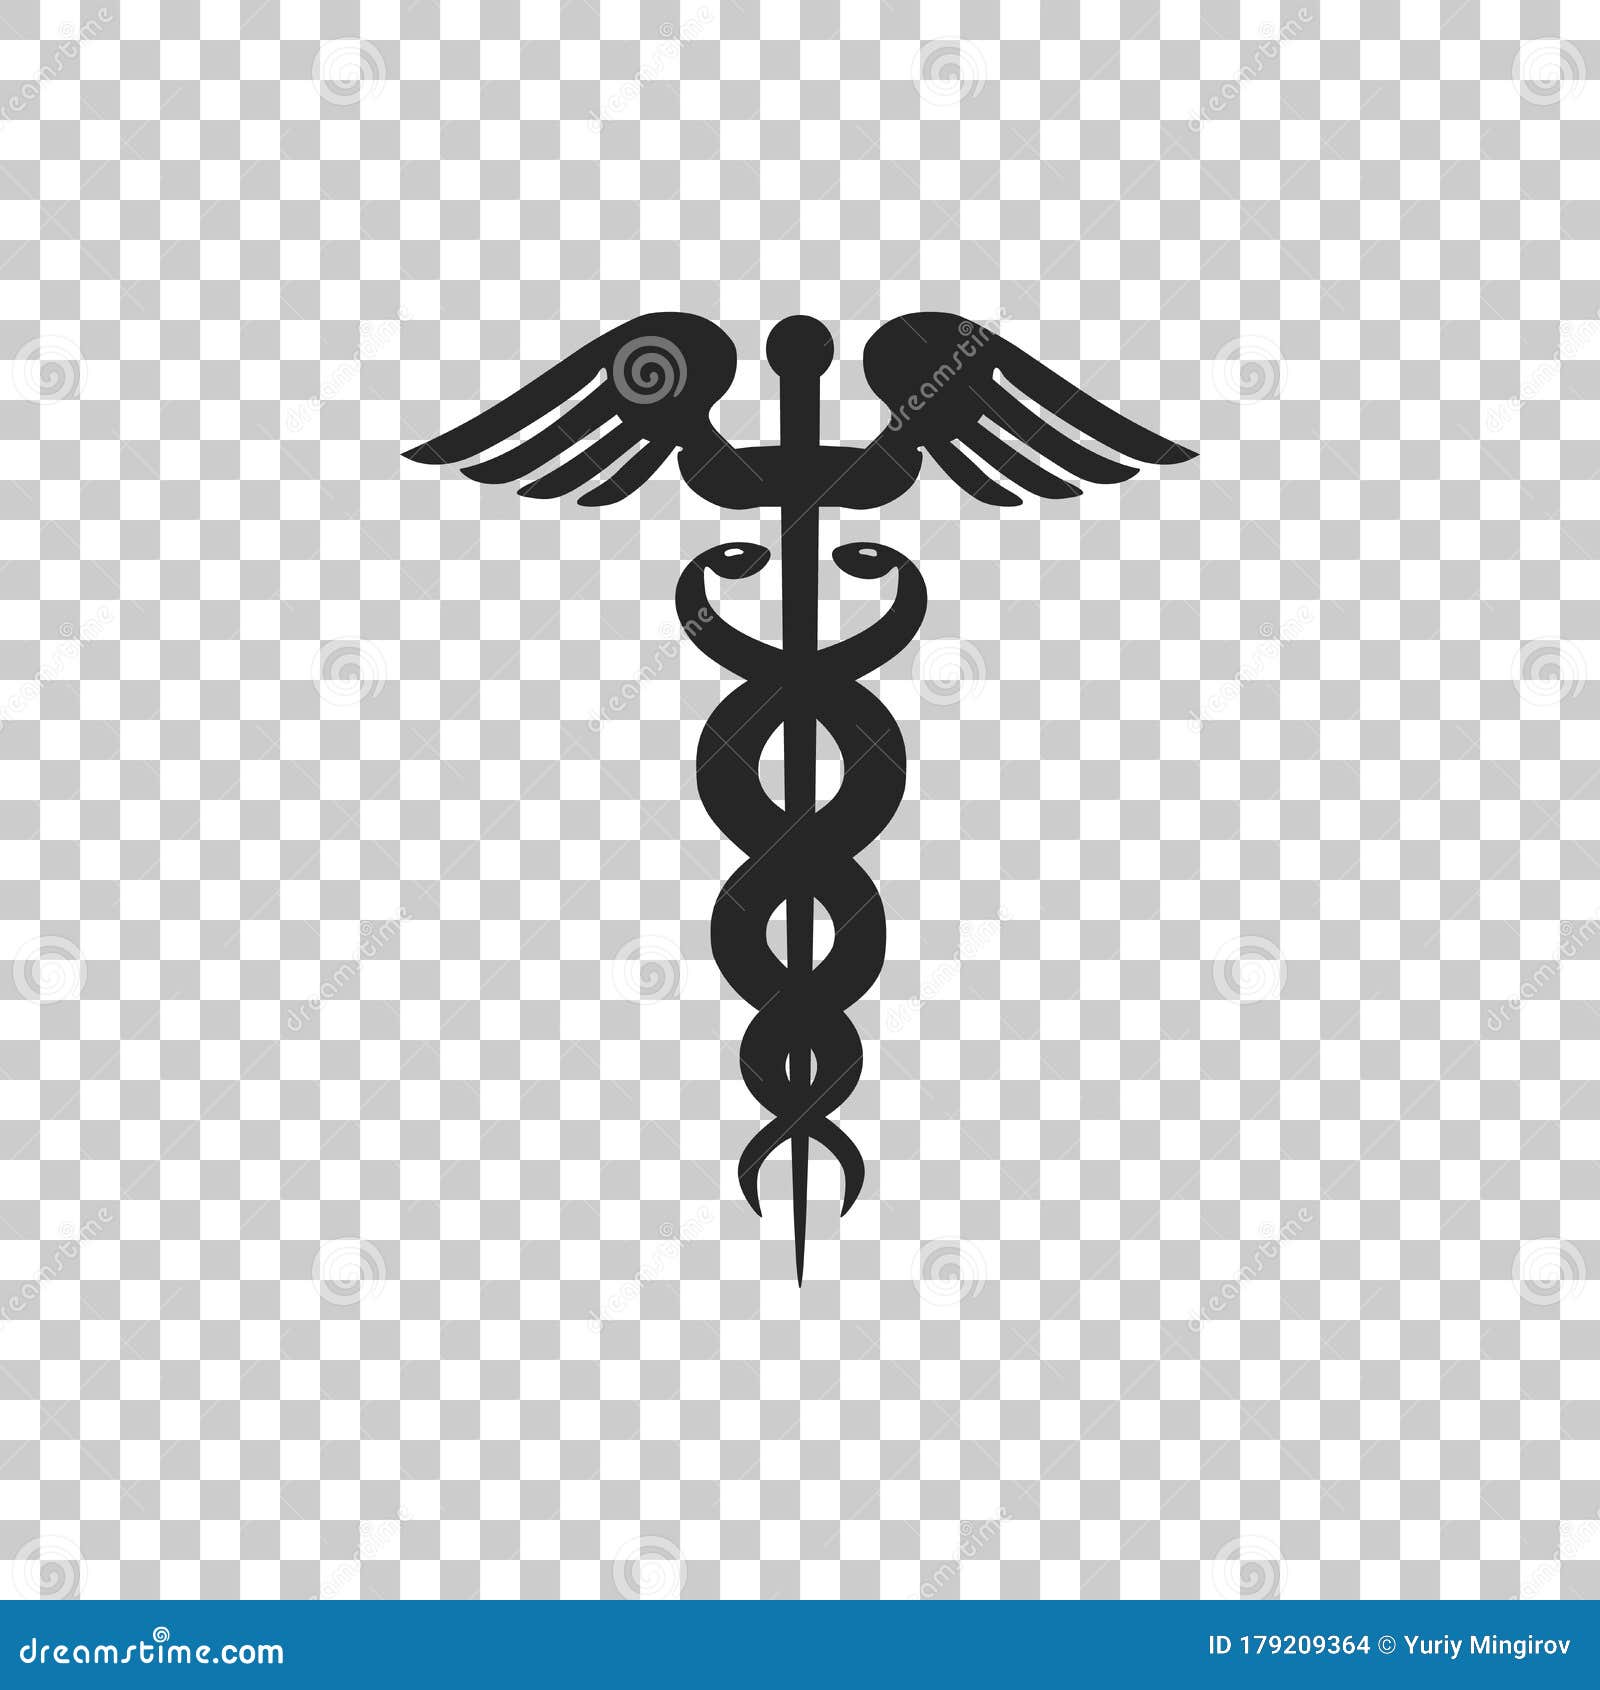 Caduceus Medical Symbol Icon Isolated On Transparent Background Medicine And Health Care Concept Emblem For Drugstore Stock Vector Illustration Of Hermes Insurance 179209364